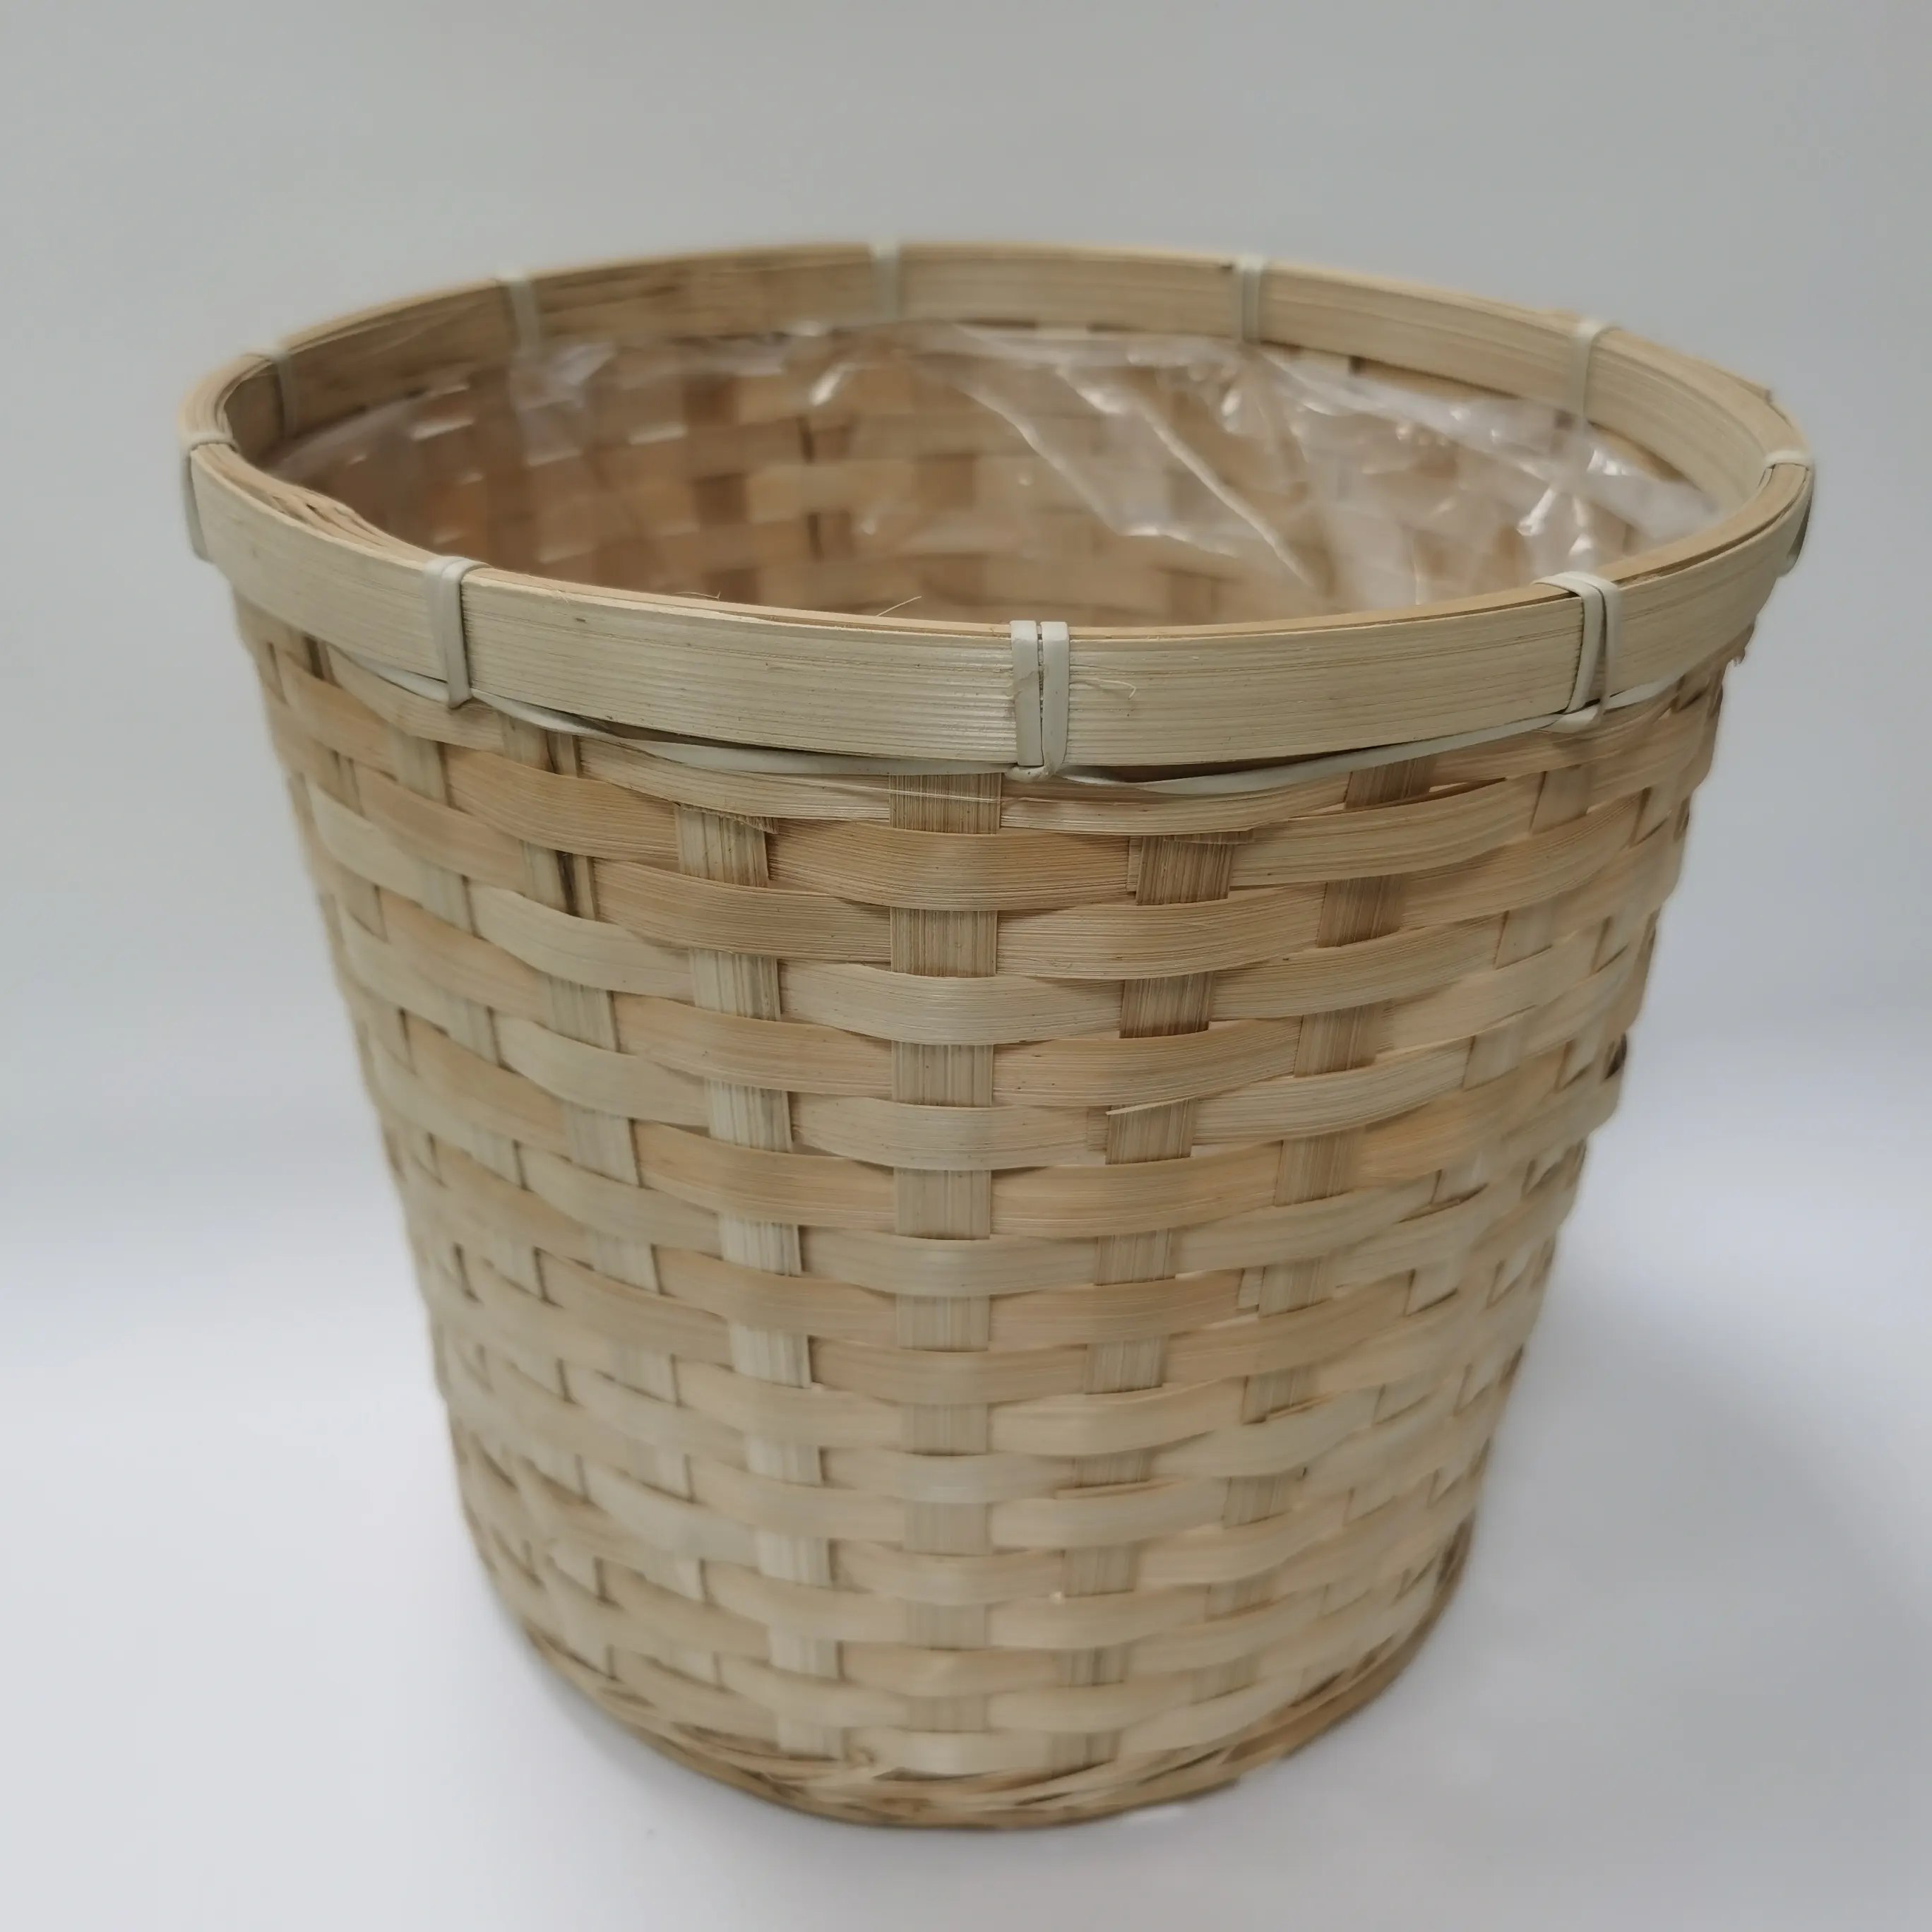 Natural Round Seagrass bamboo wicker Belly Basket with Handles Bamboo plant woven rattan plant flower pot holder